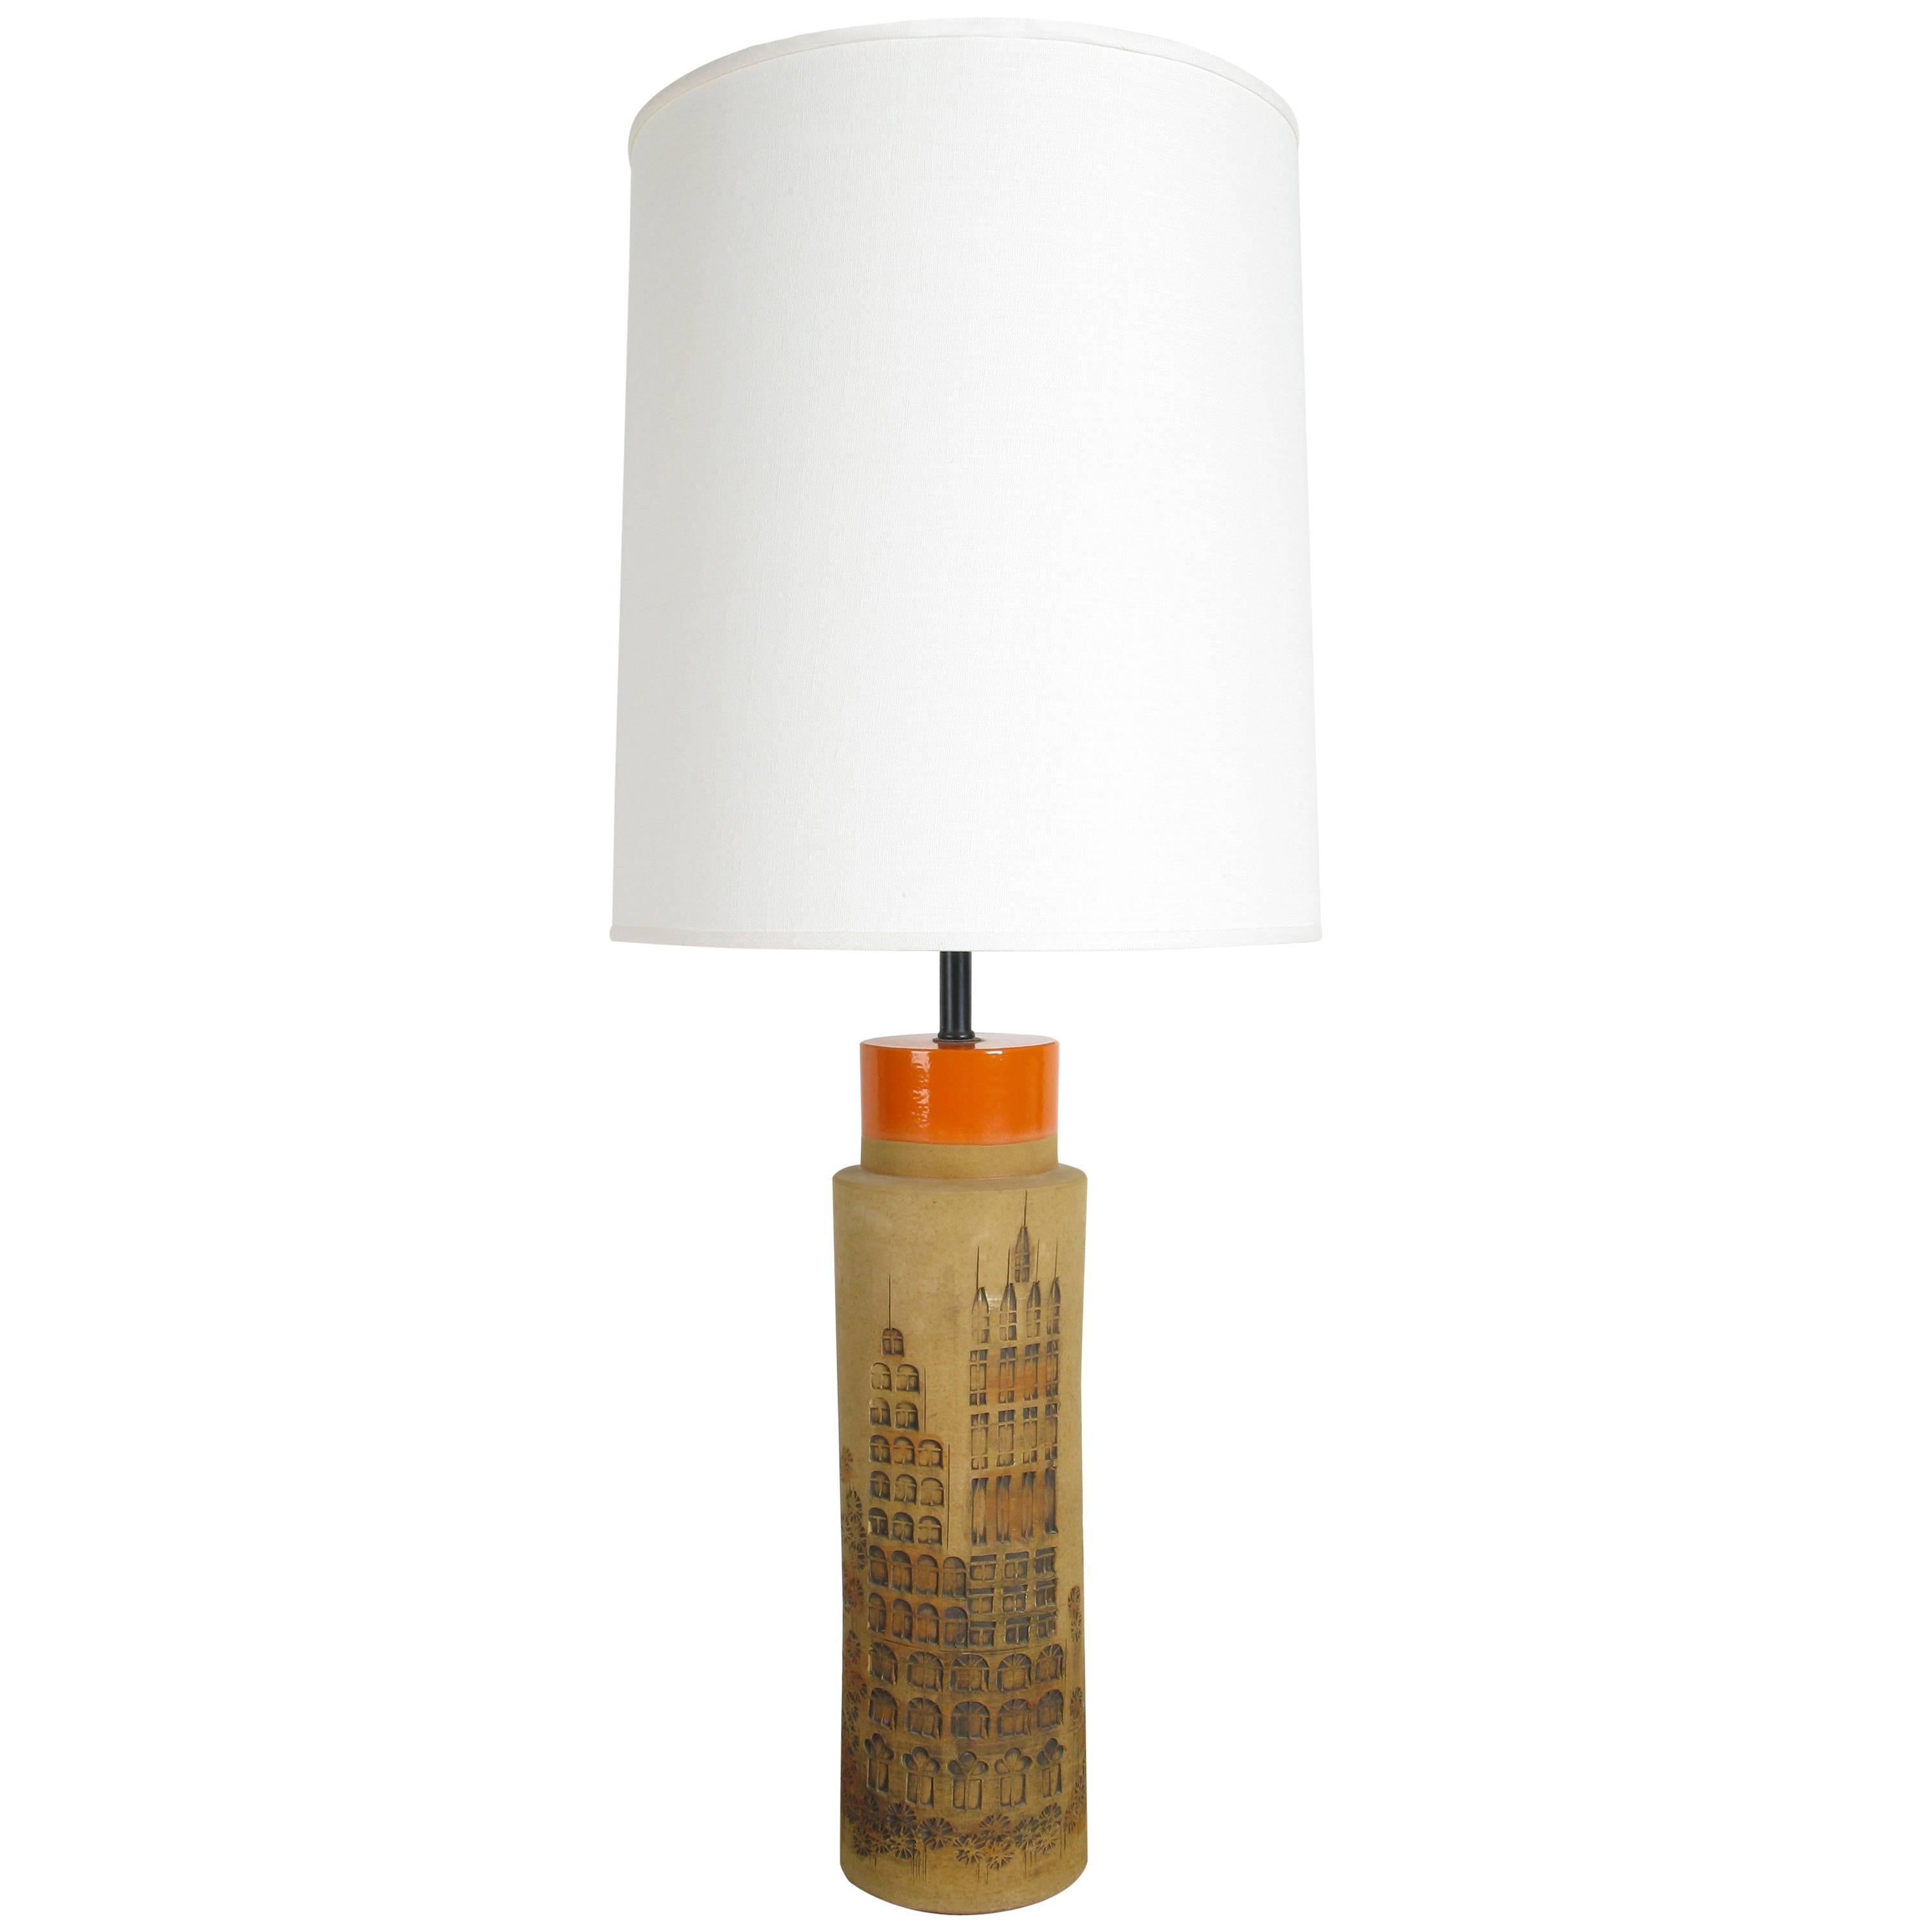 "Campus" Lamp by Aldo Londi for Bitossi For Sale